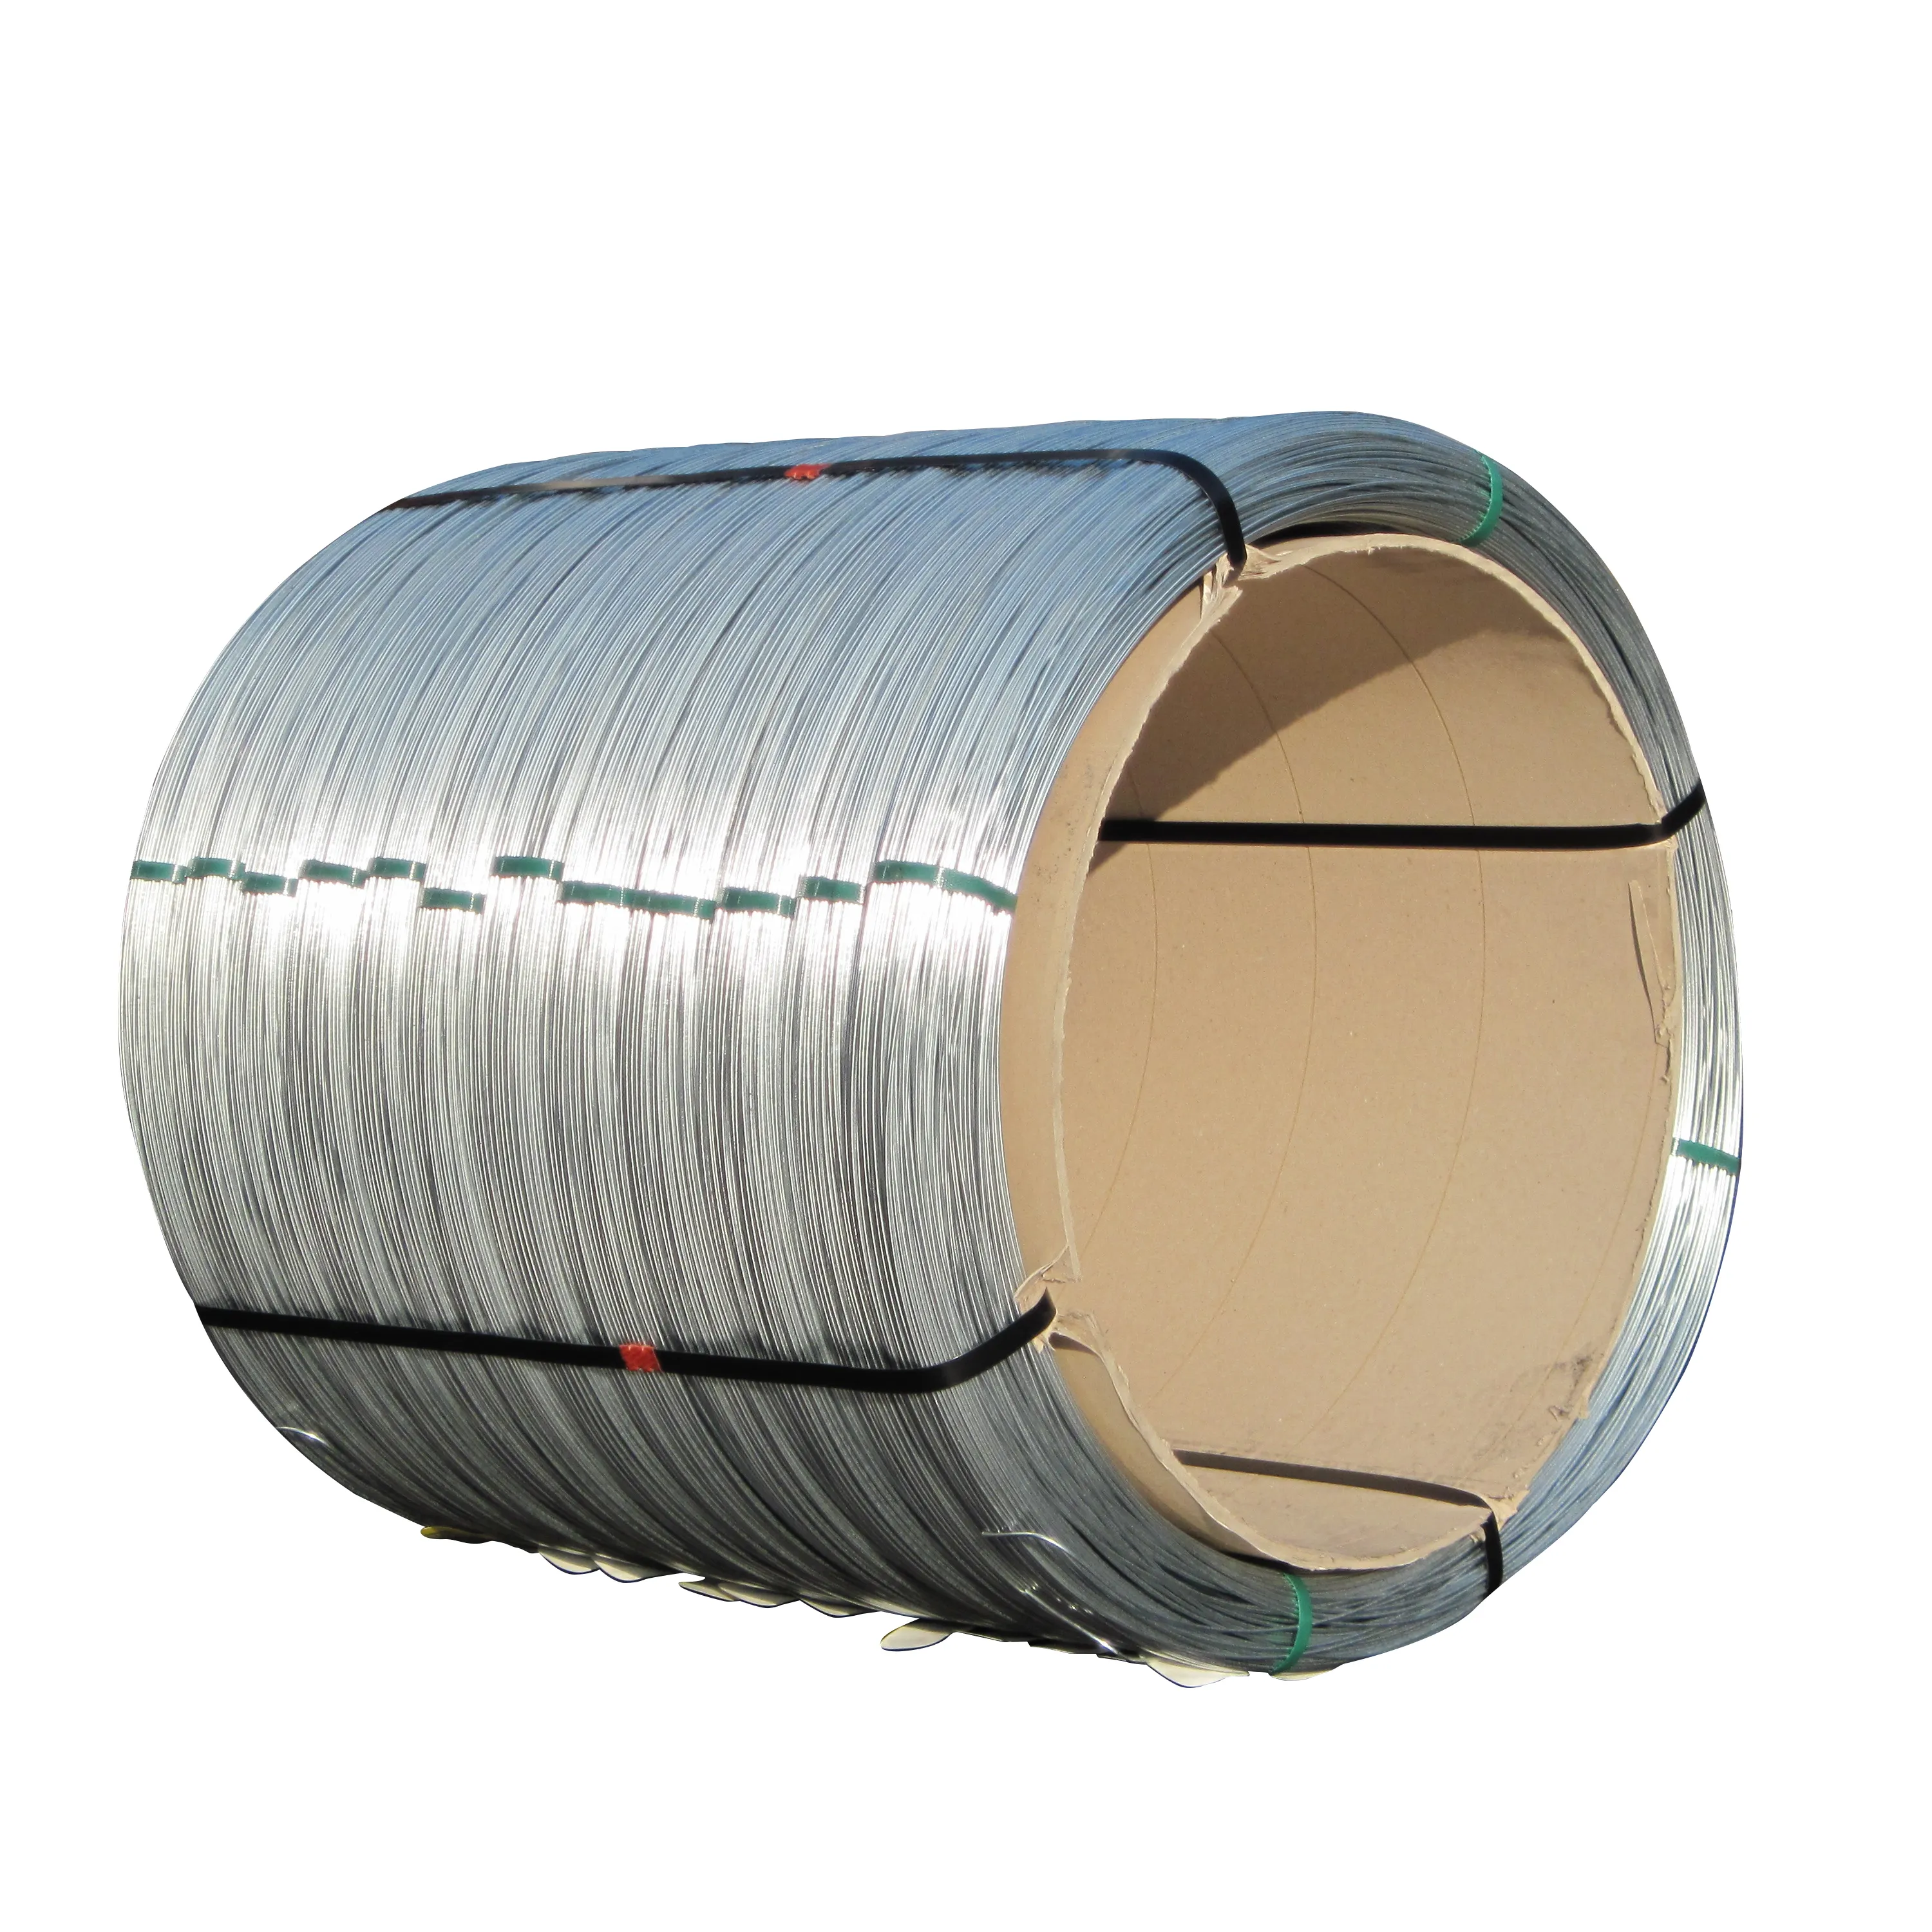 Top quality Italian zinc-aluminium steel wire for orchards diam. 2.40 mm in agriculture installations